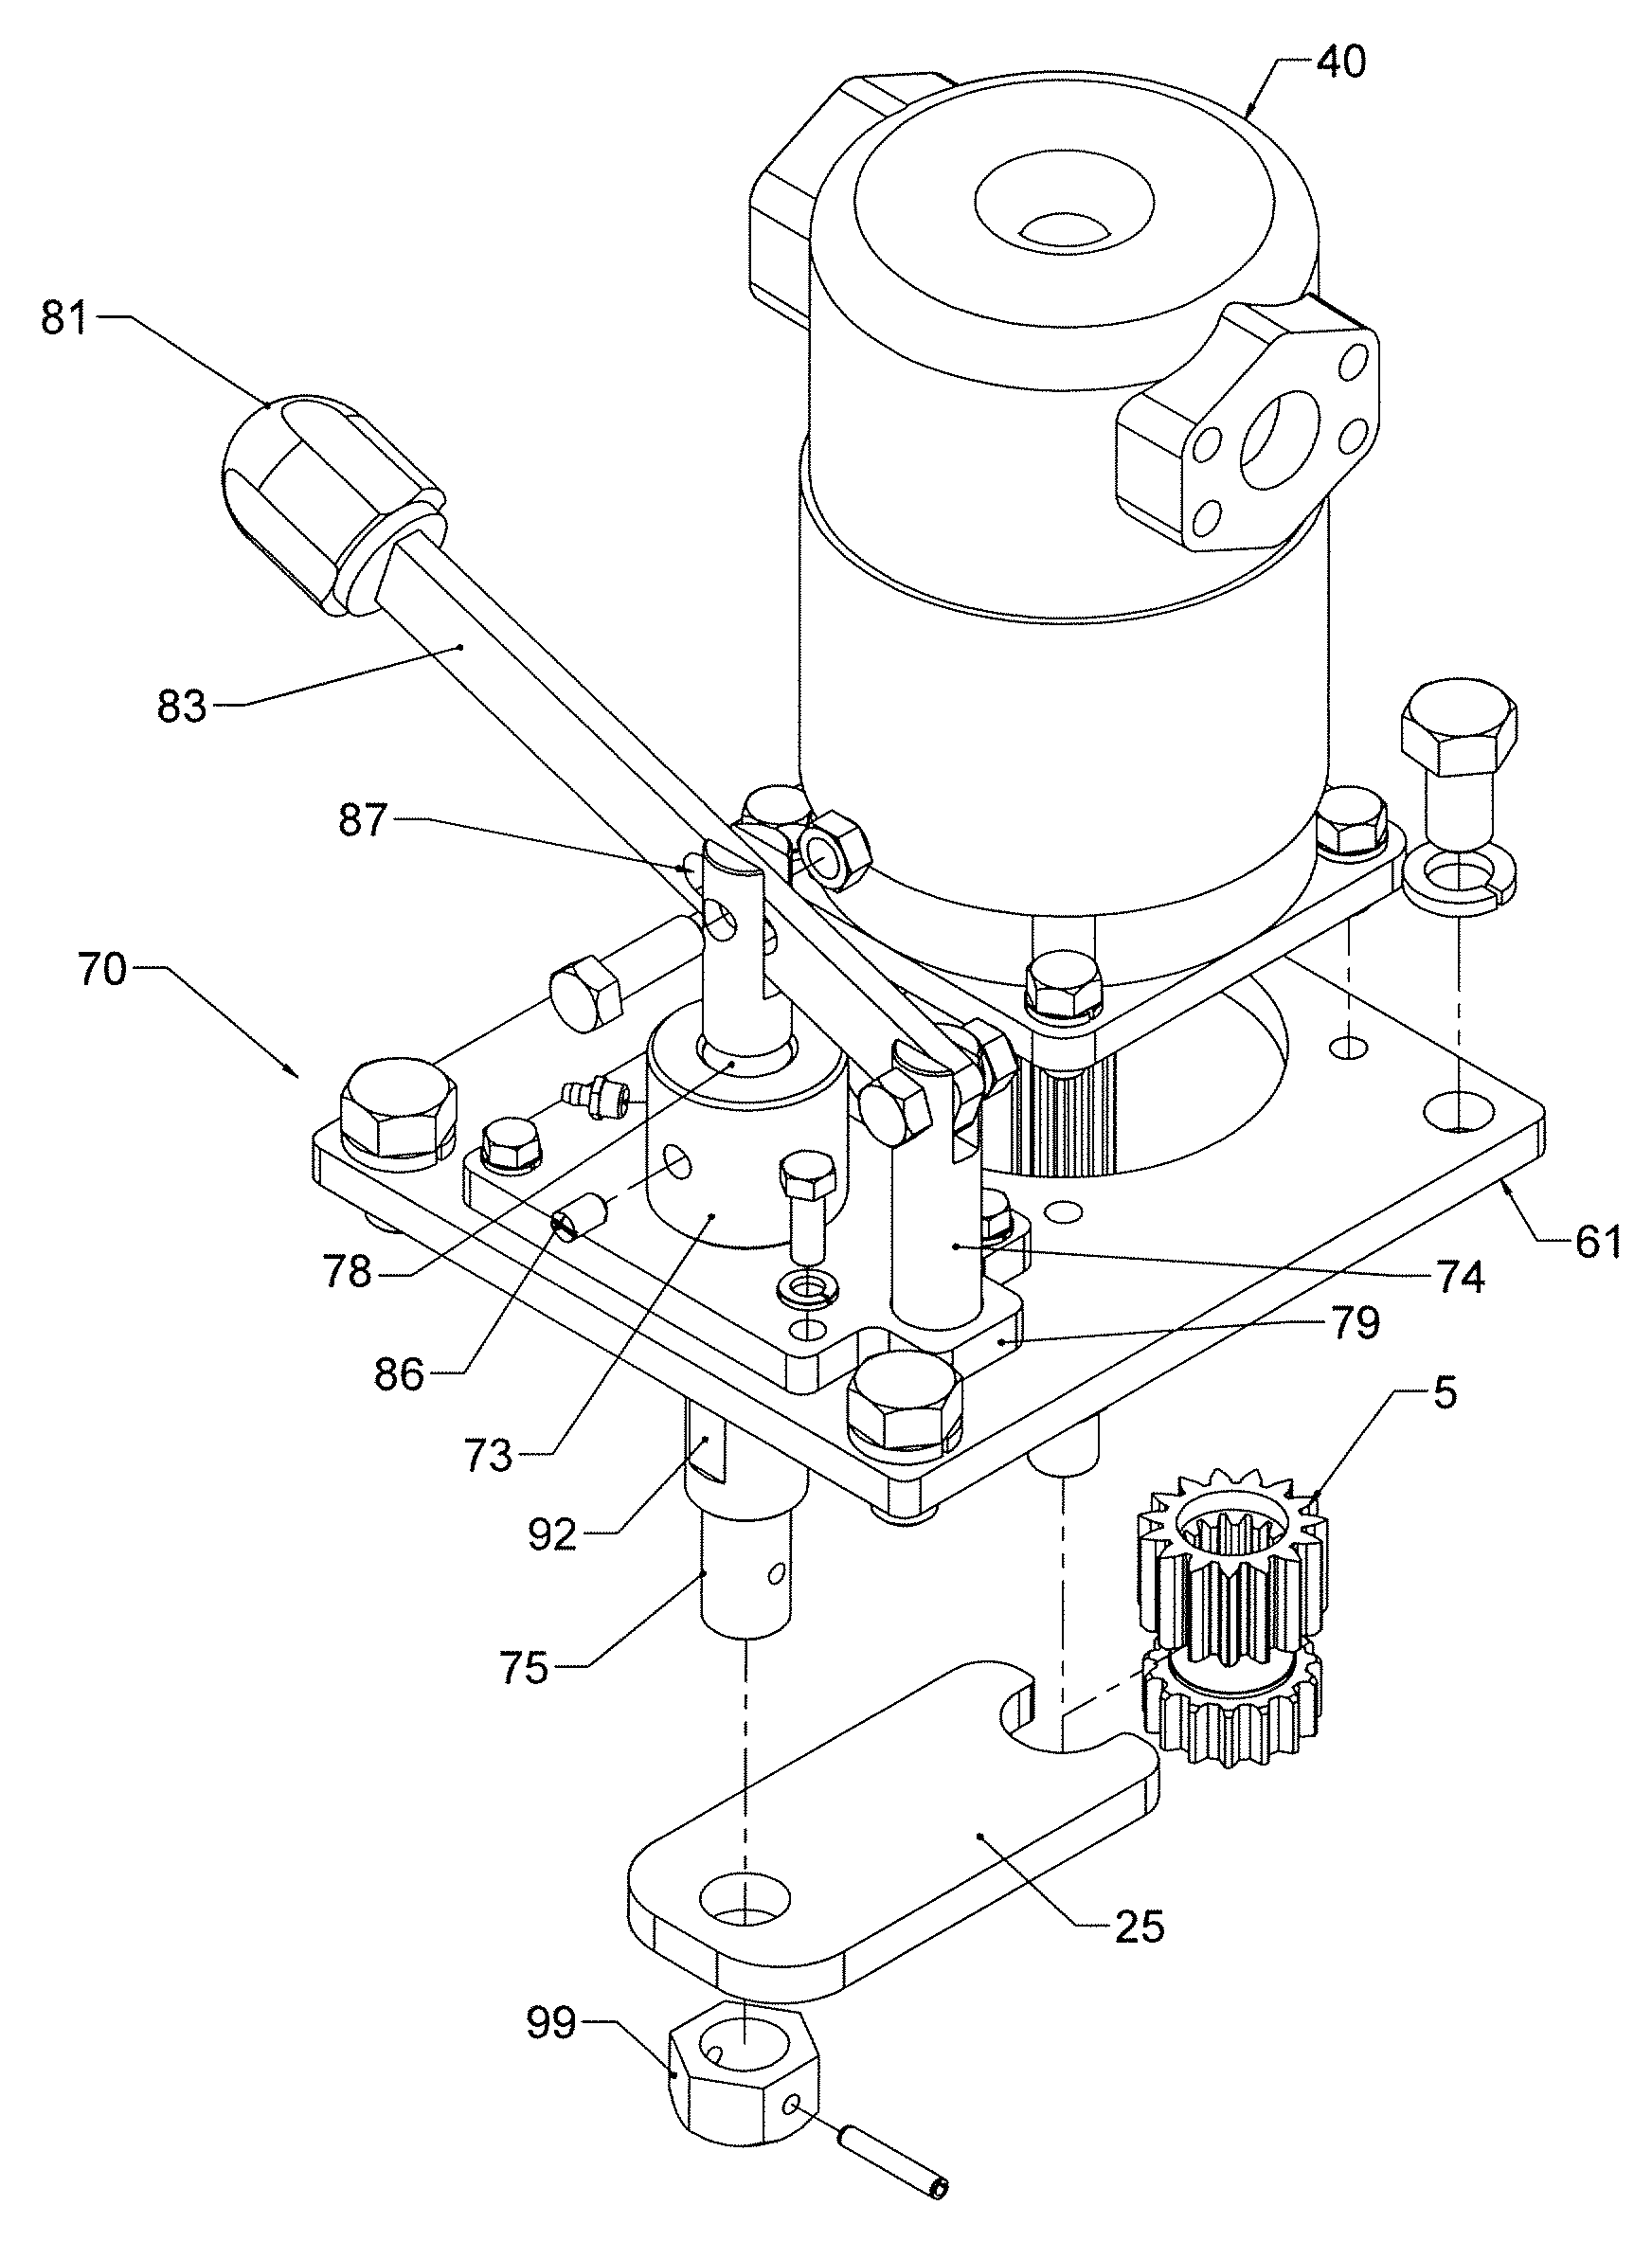 Tong Gear Shift System